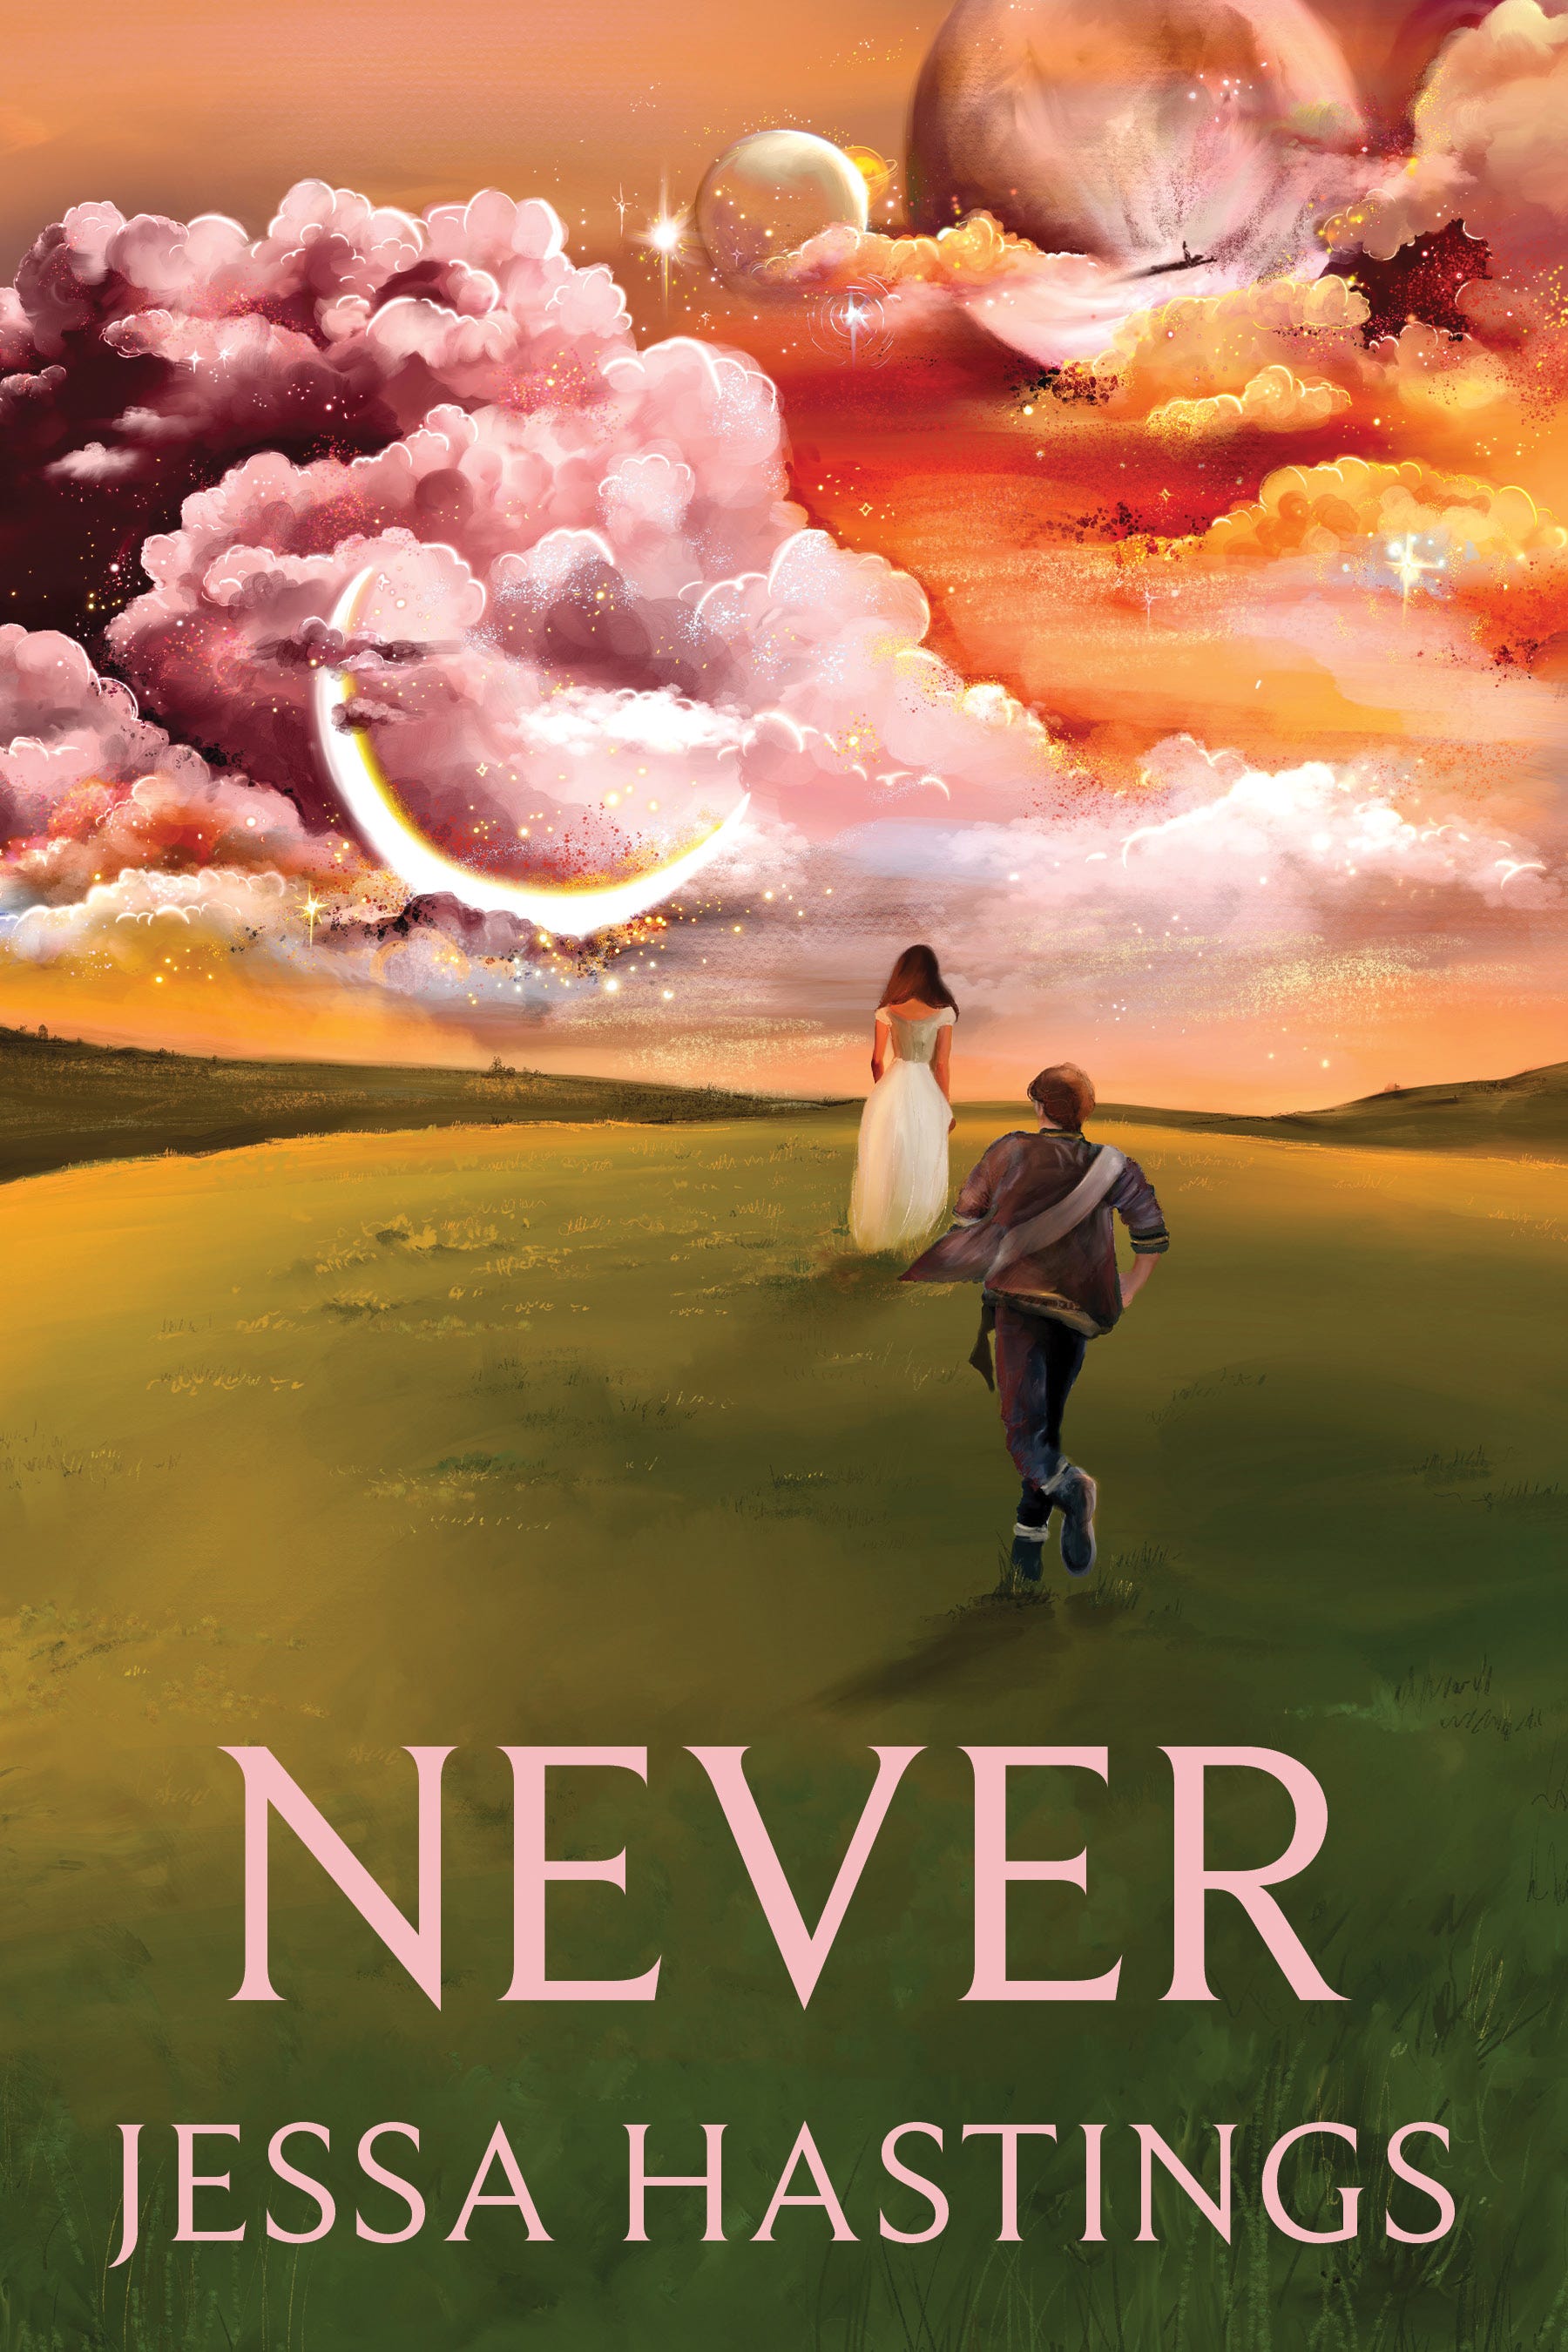 Never by Jessa Hastings